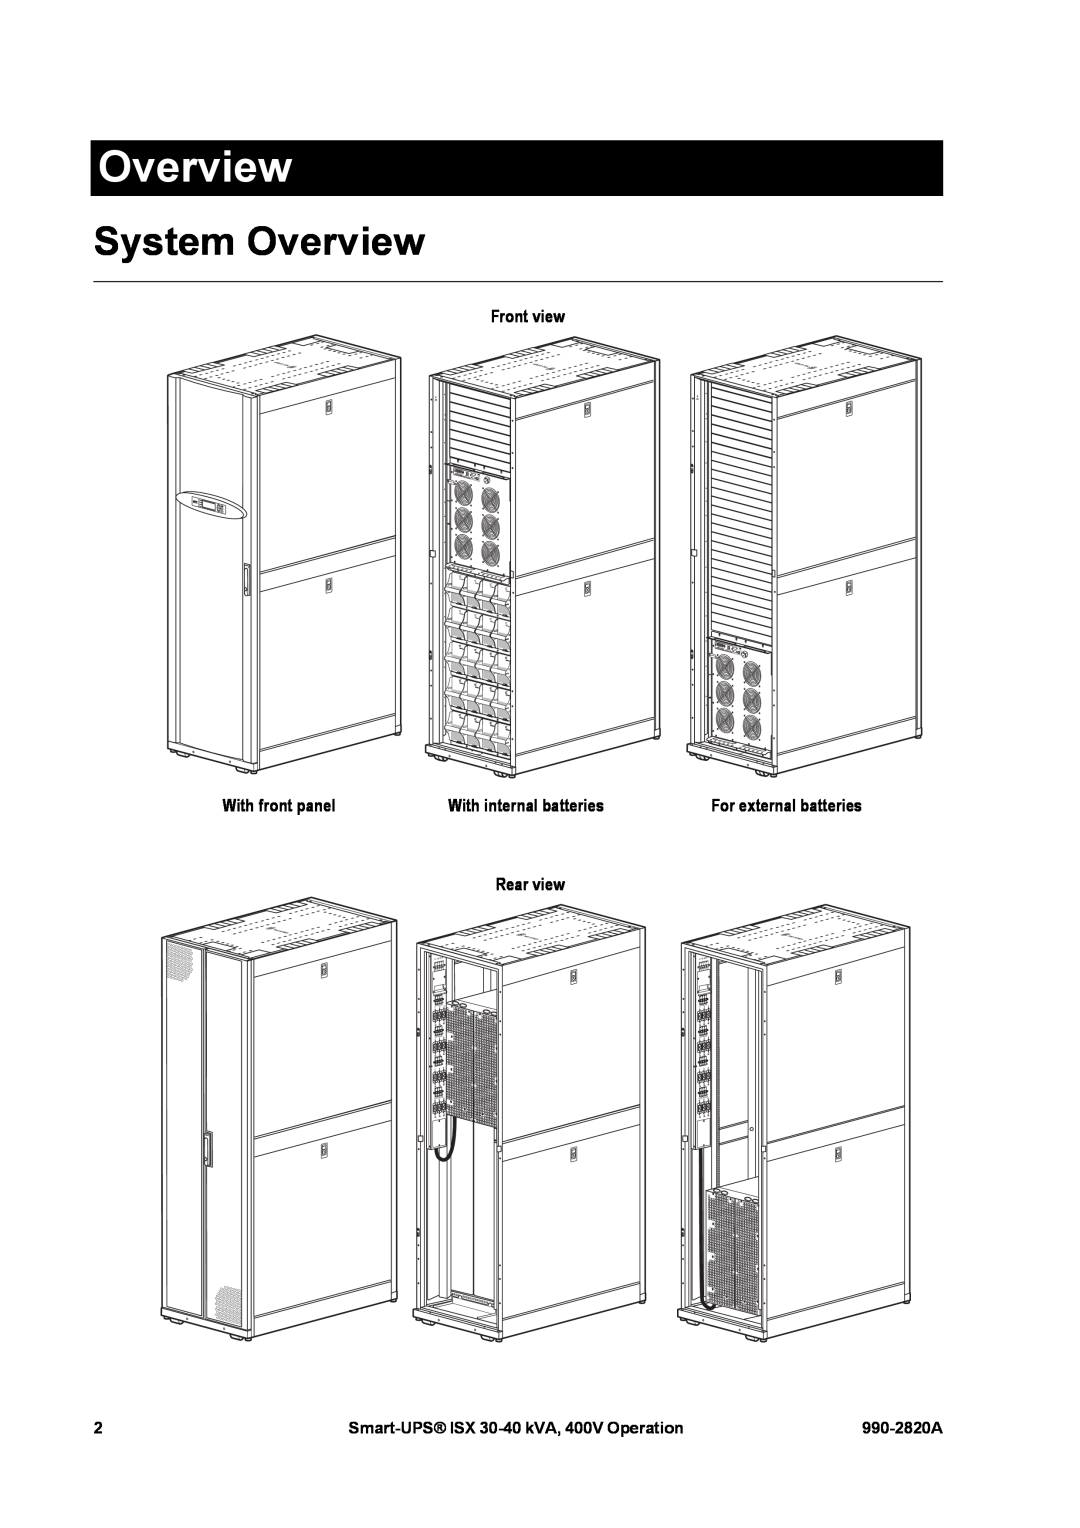 American Power Conversion VT ISX System Overview, Front view, With front panel, With internal batteries, Rear view 